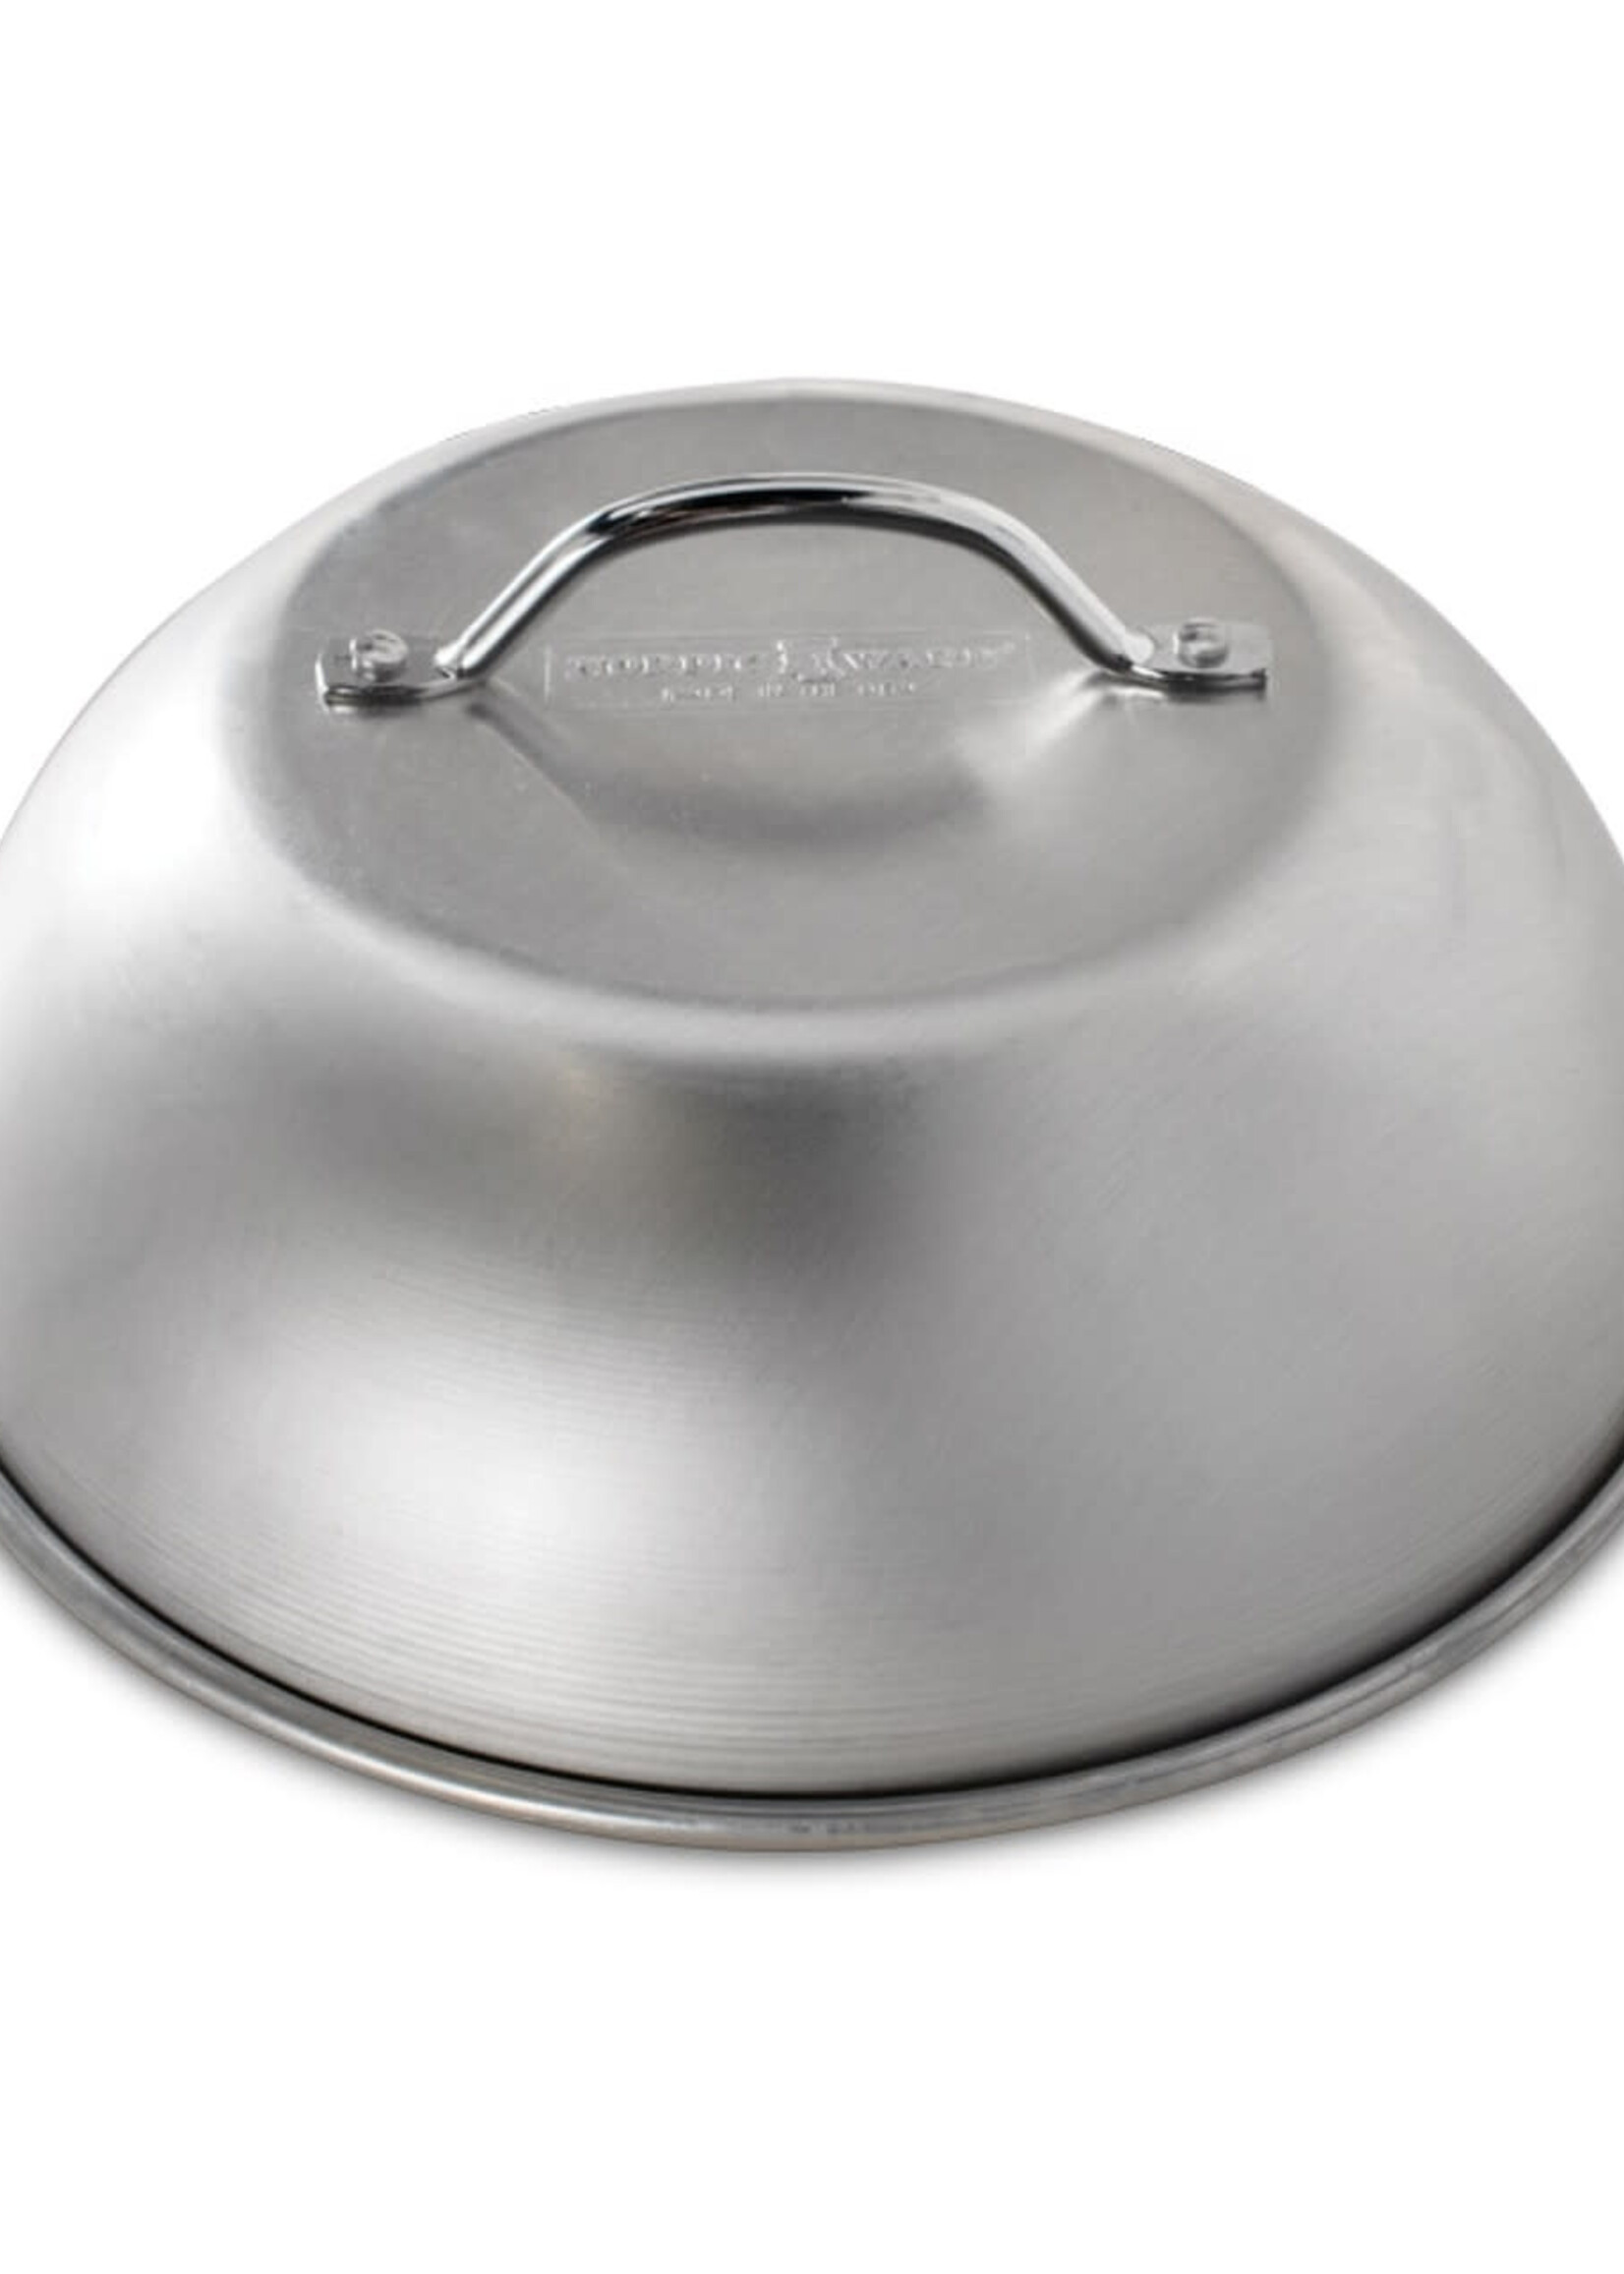 Nordic Ware 10" High Dome Grill LId